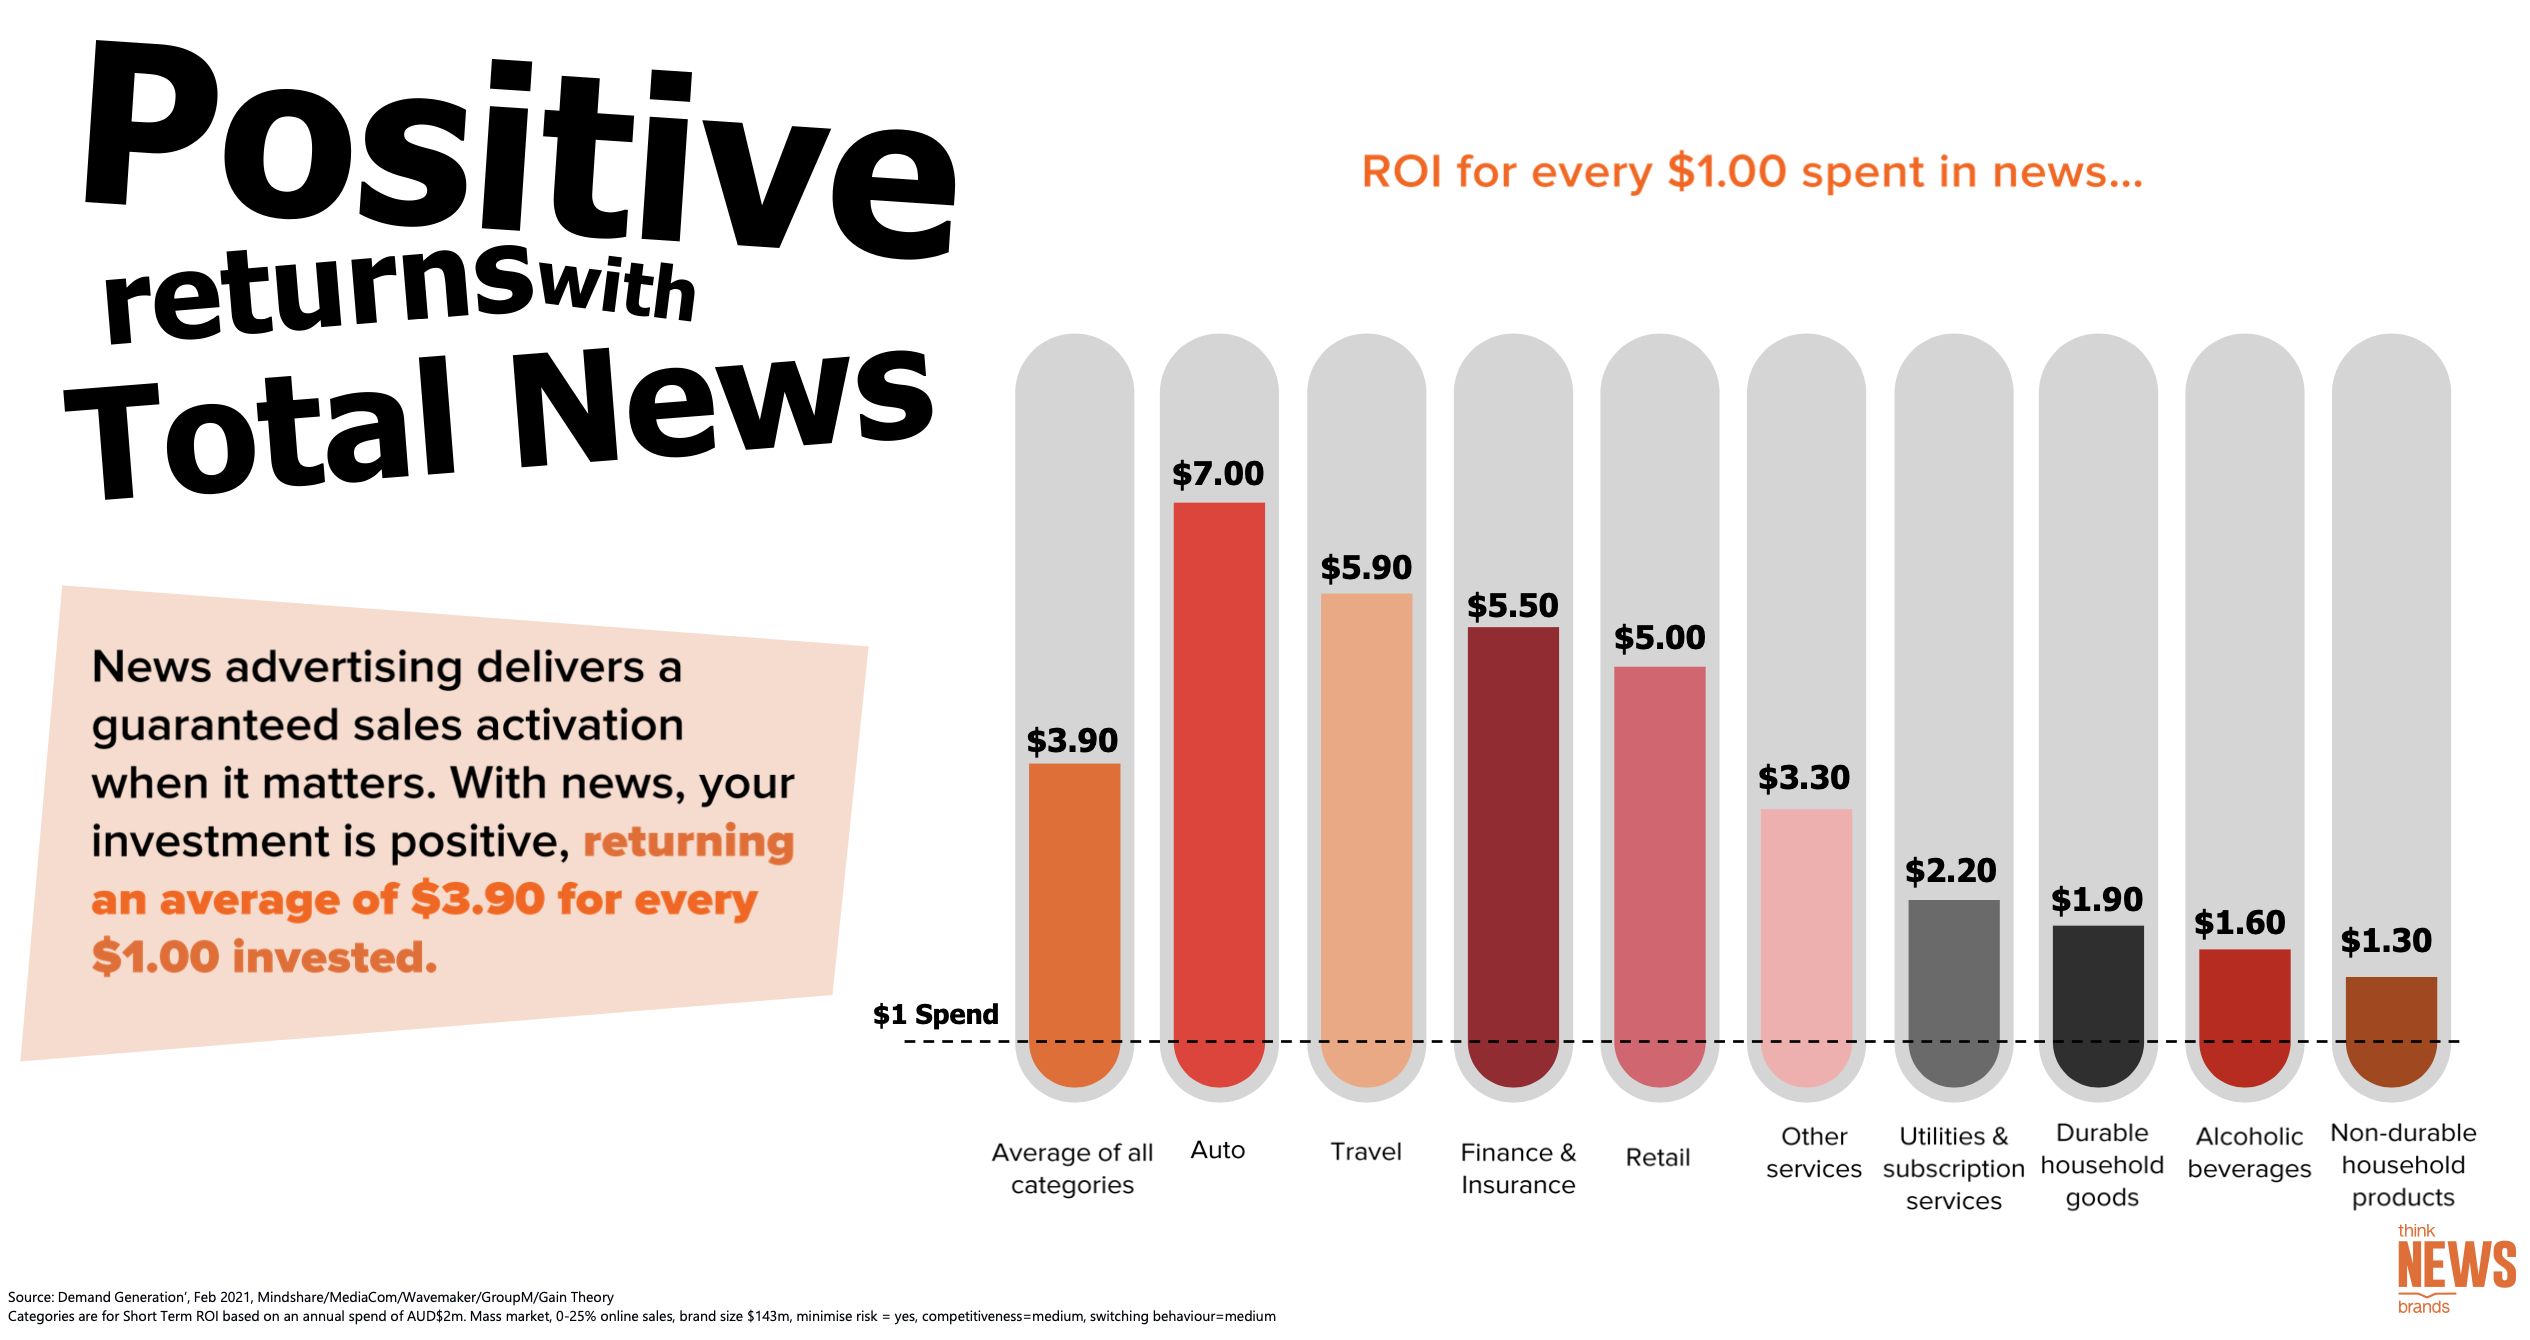 ThinkNewsBrands chart on Total News ROI by category